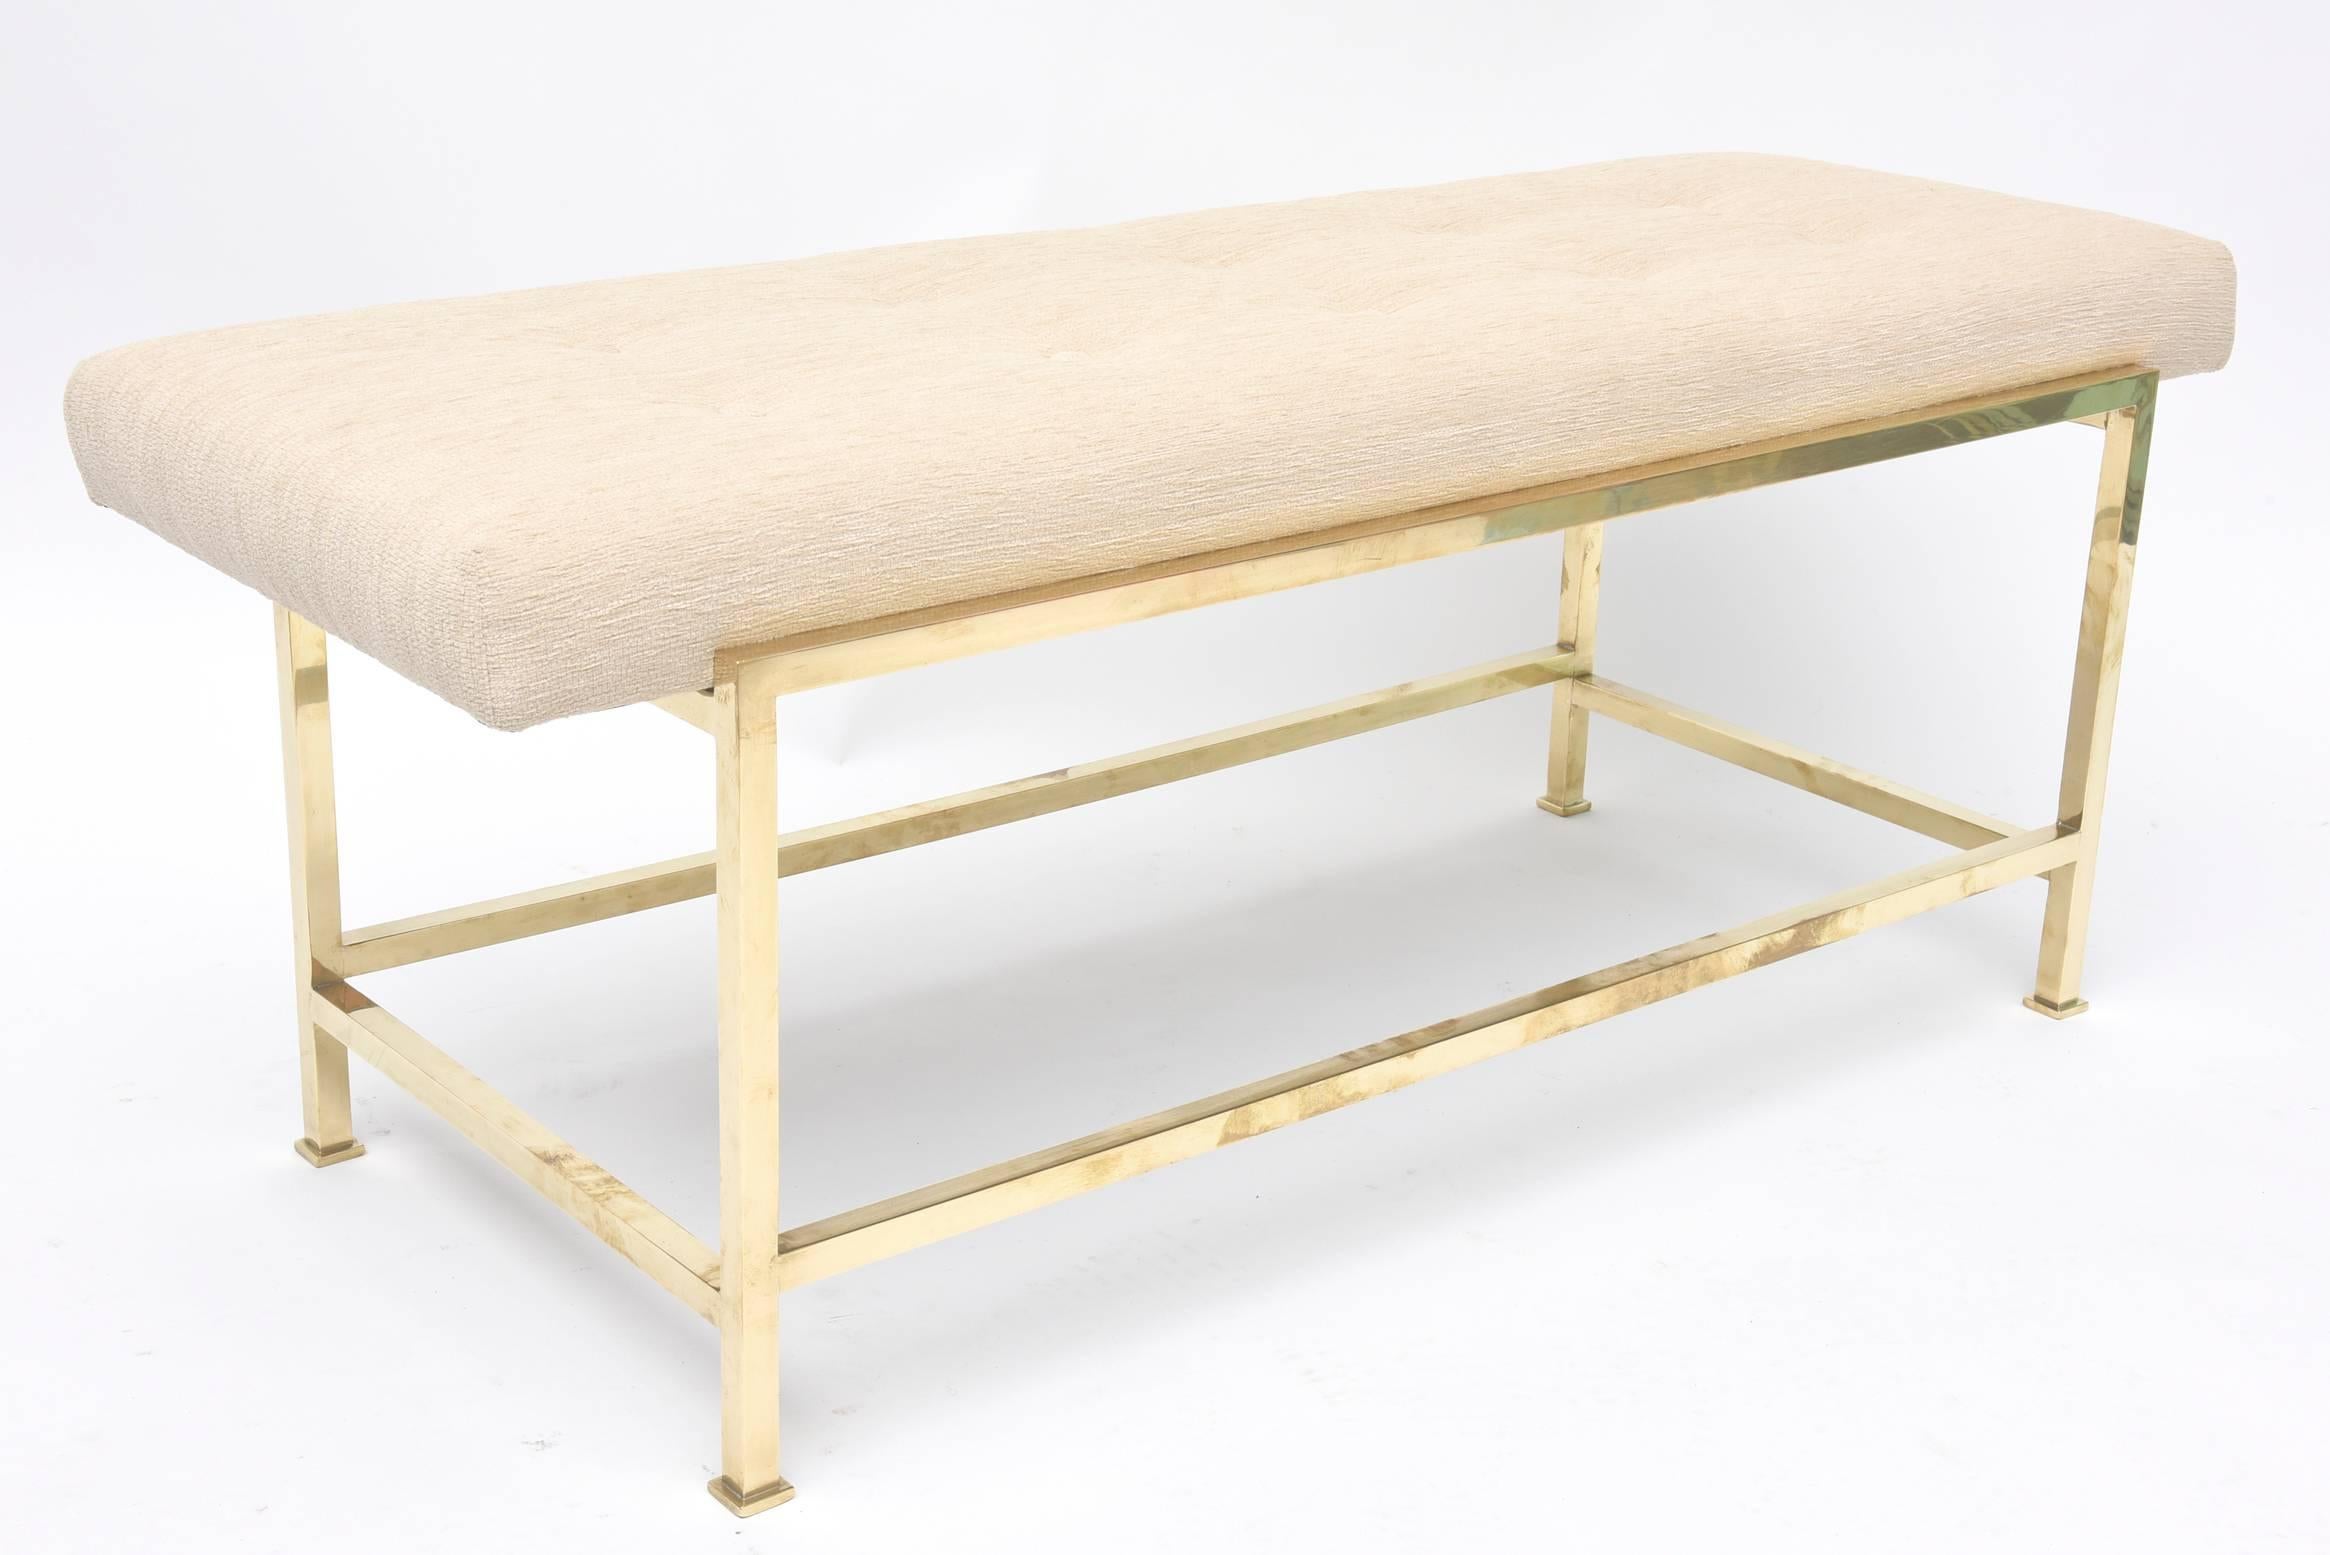 Edward Wormley bench's manufactured by Dunbar.
Two bench's available, price is for one bench.